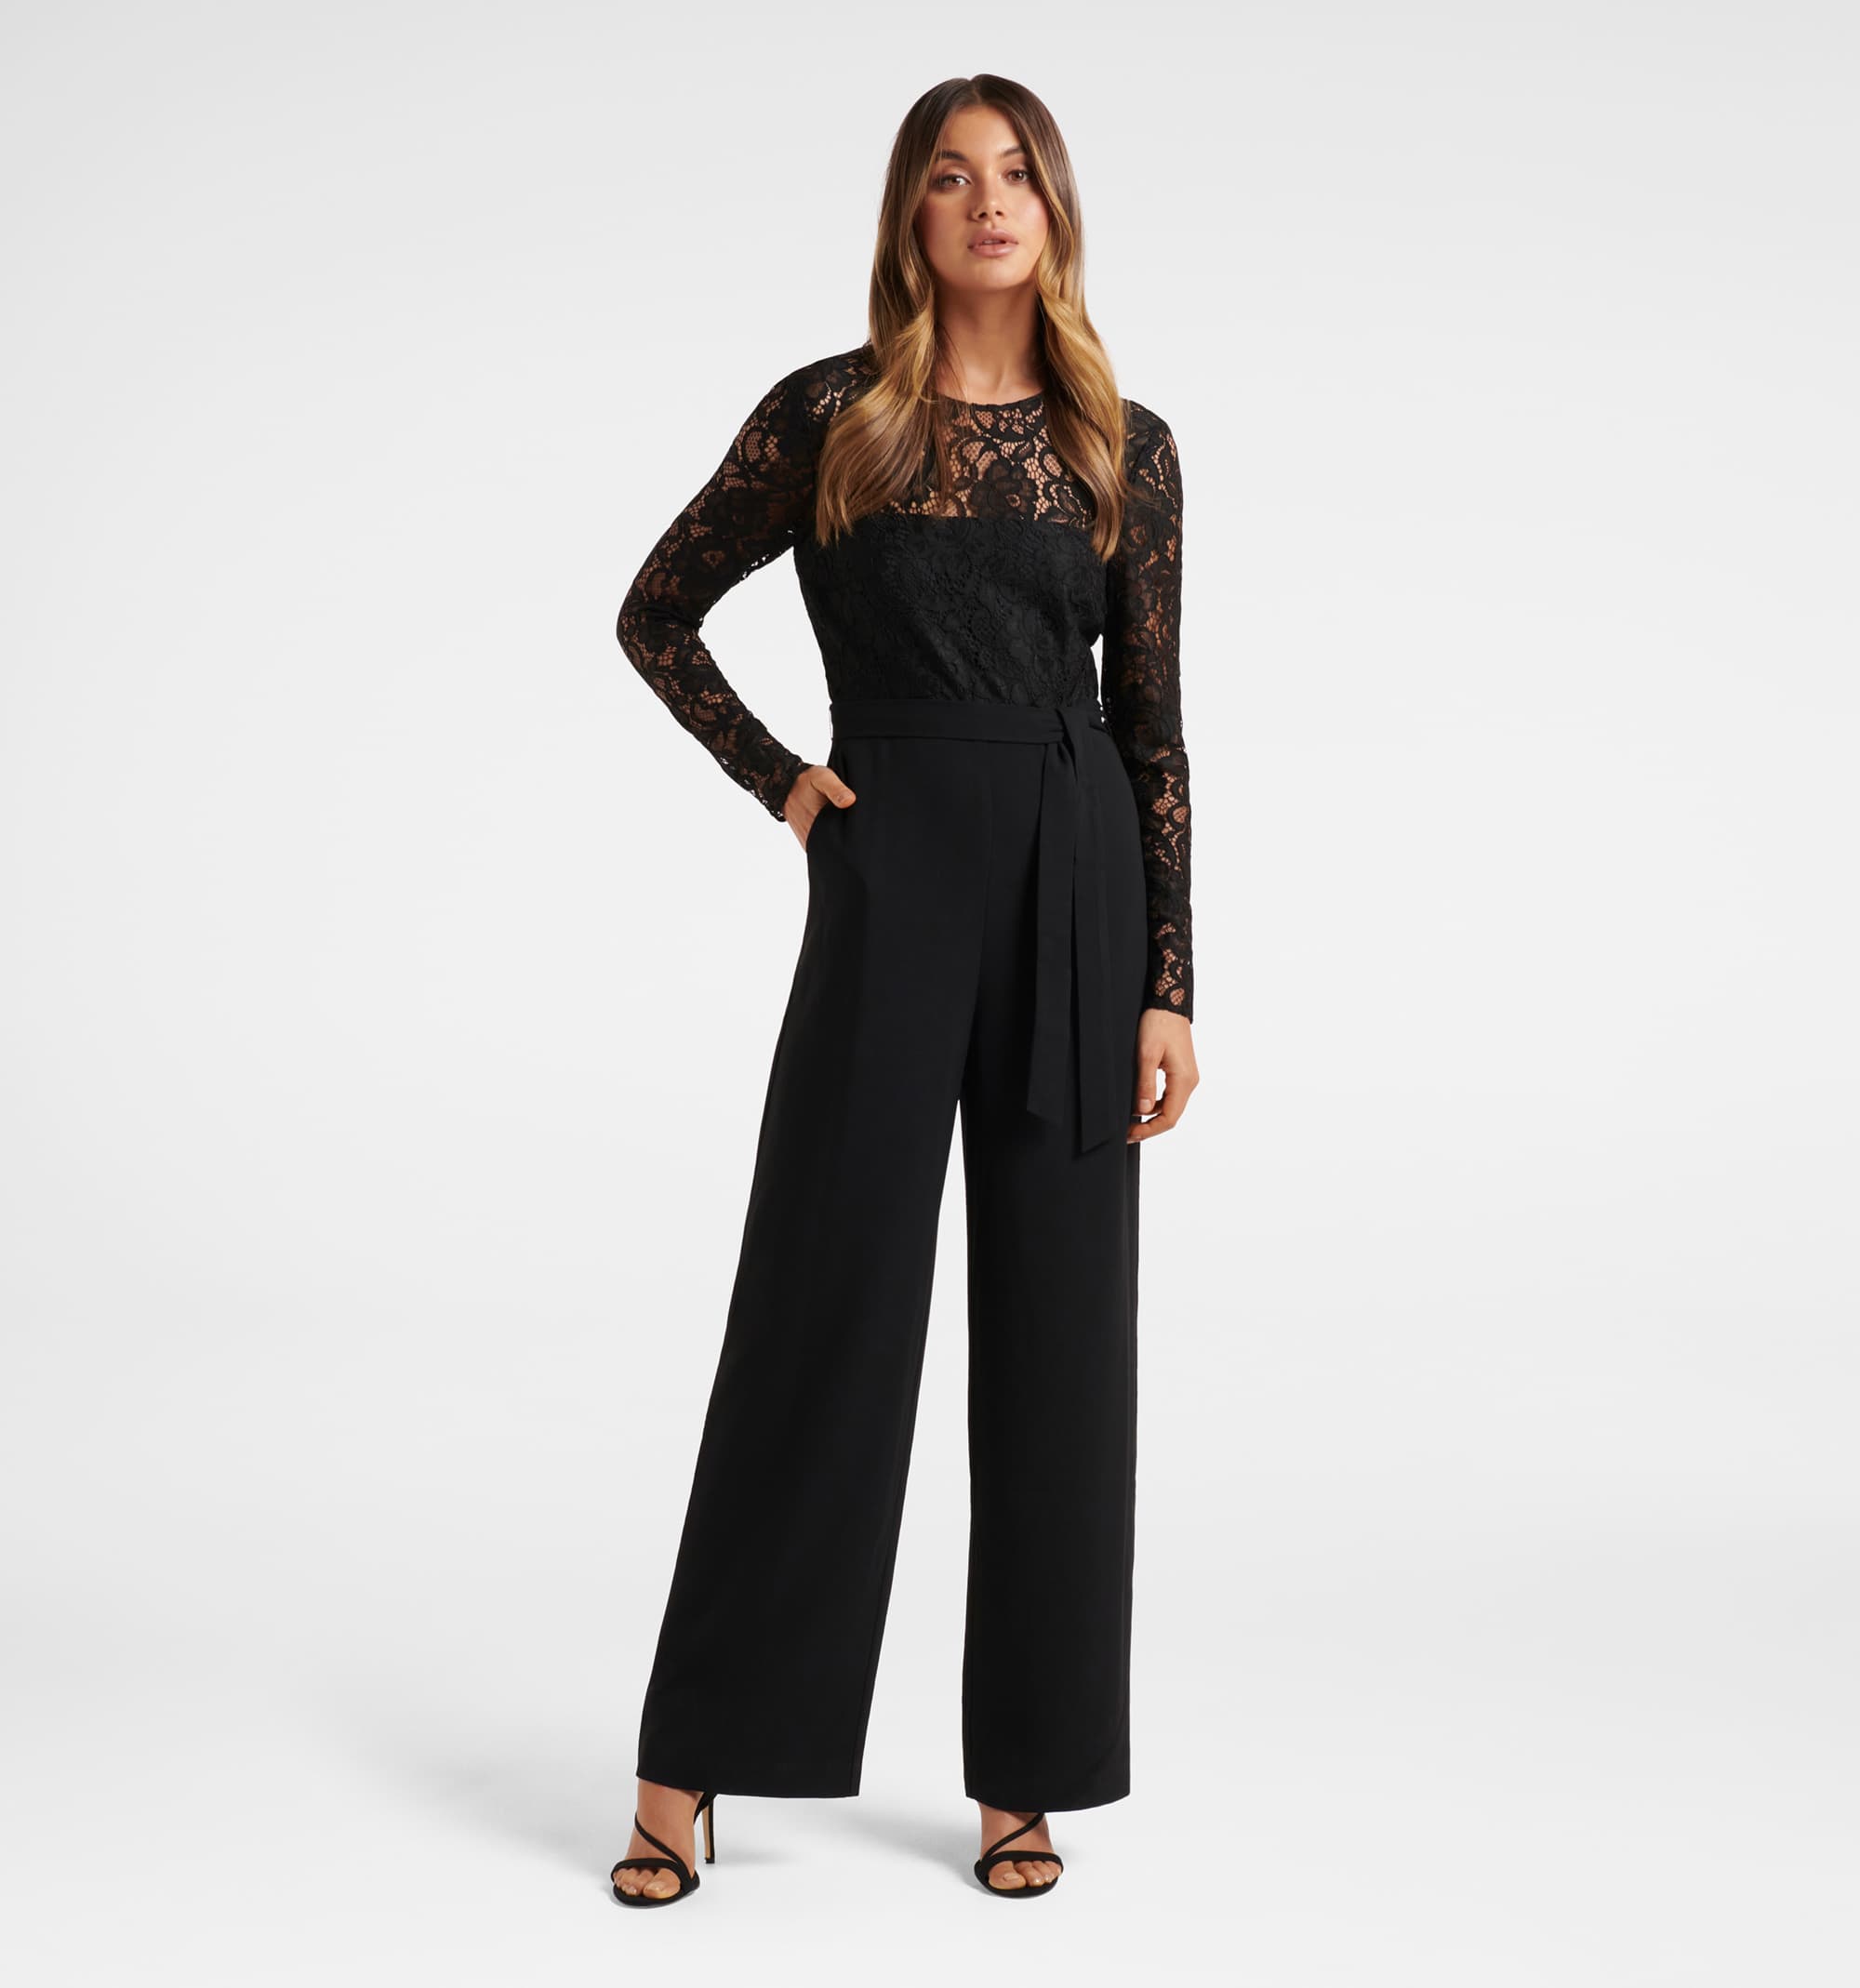 Buy Latest Jumpsuits for Women Online at Forever New